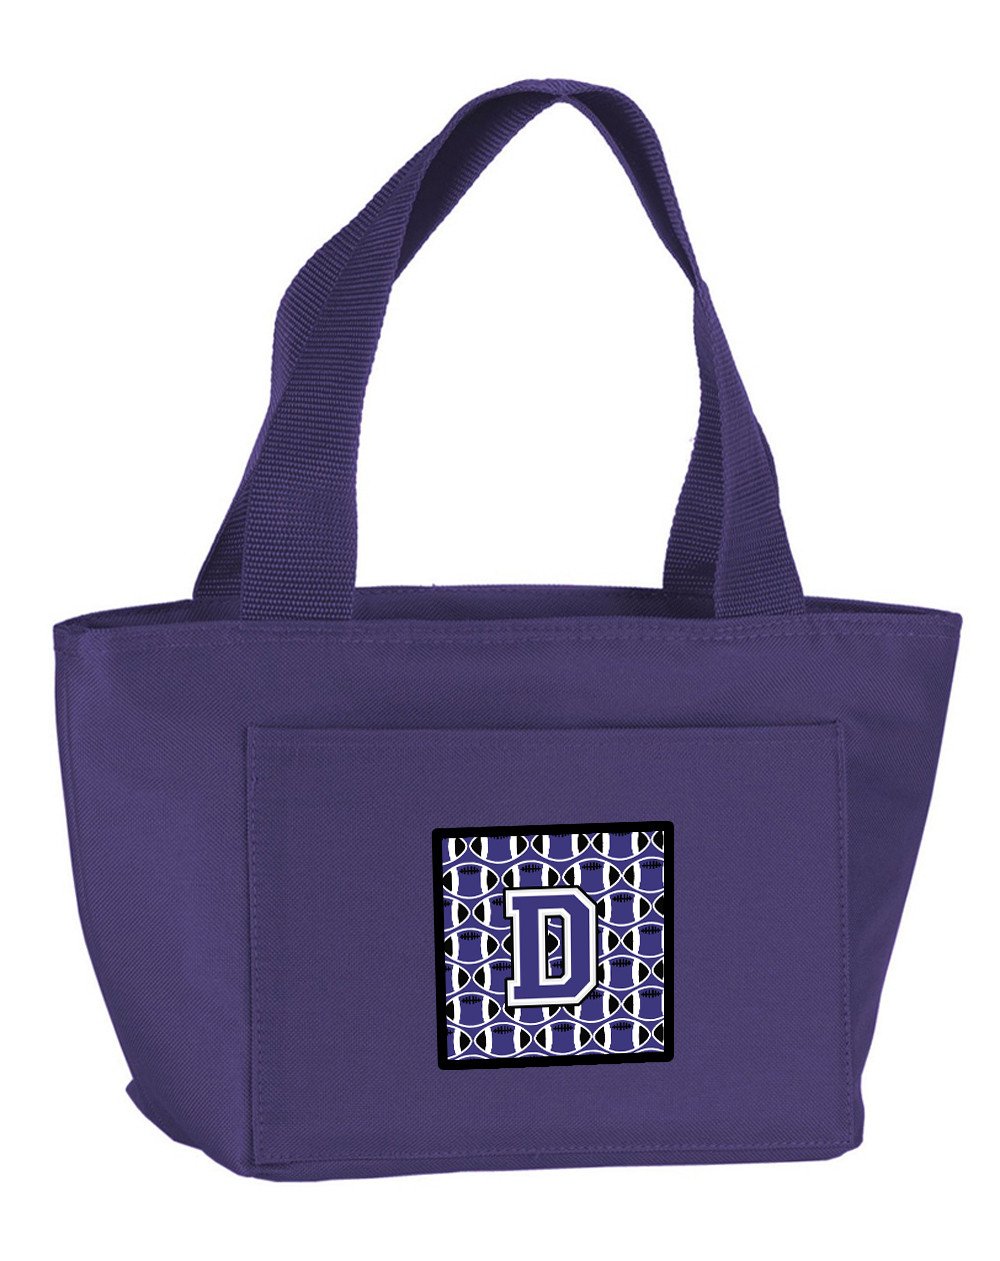 Letter D Football Purple and White Lunch Bag CJ1068-DPR-8808 by Caroline's Treasures